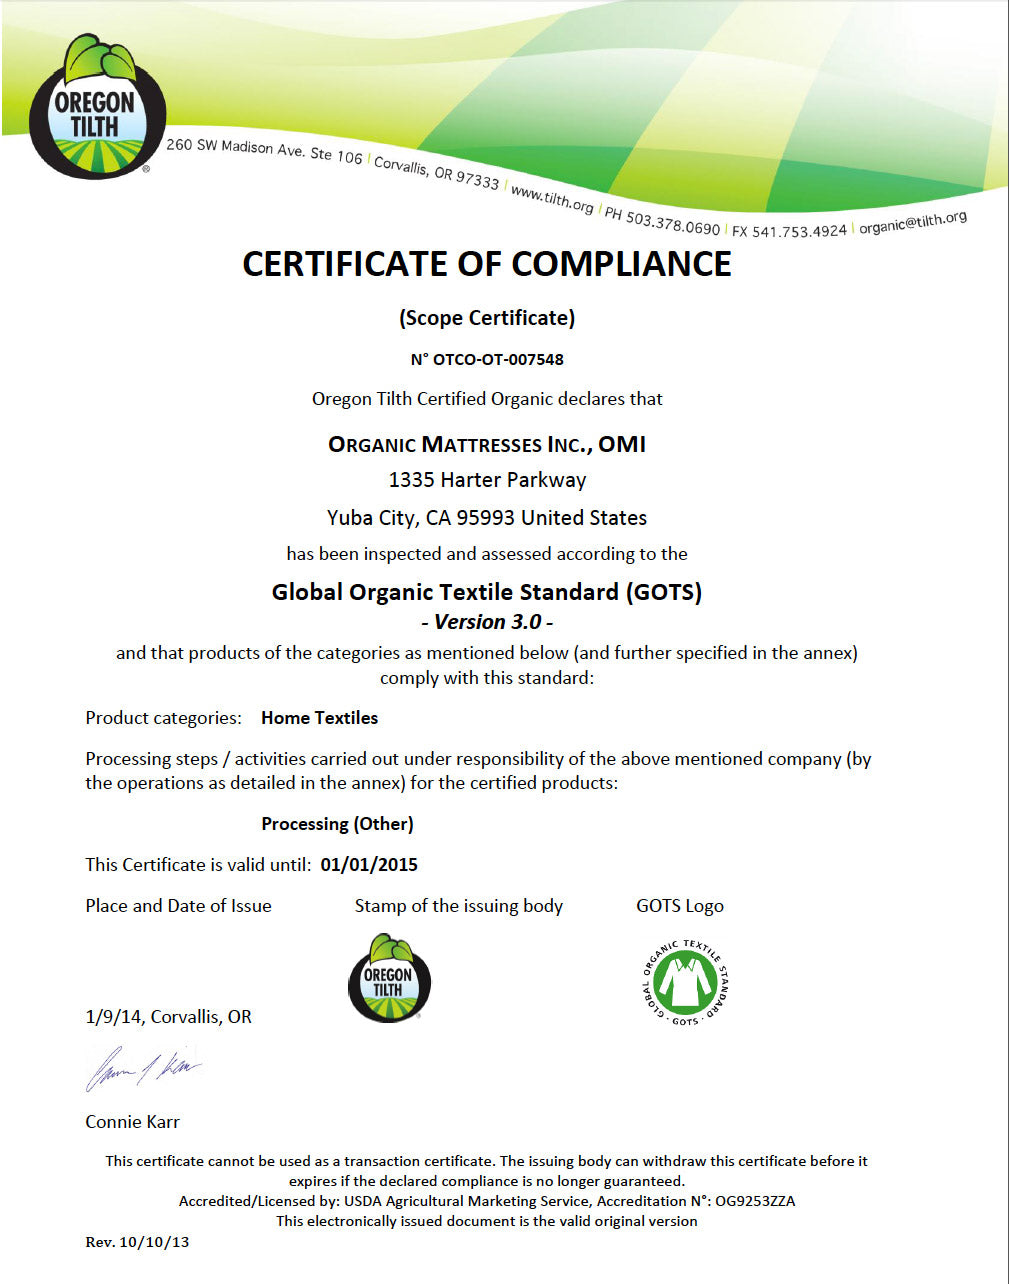 What is GOTS (Global Organic Textile Standard) Organic certificate?